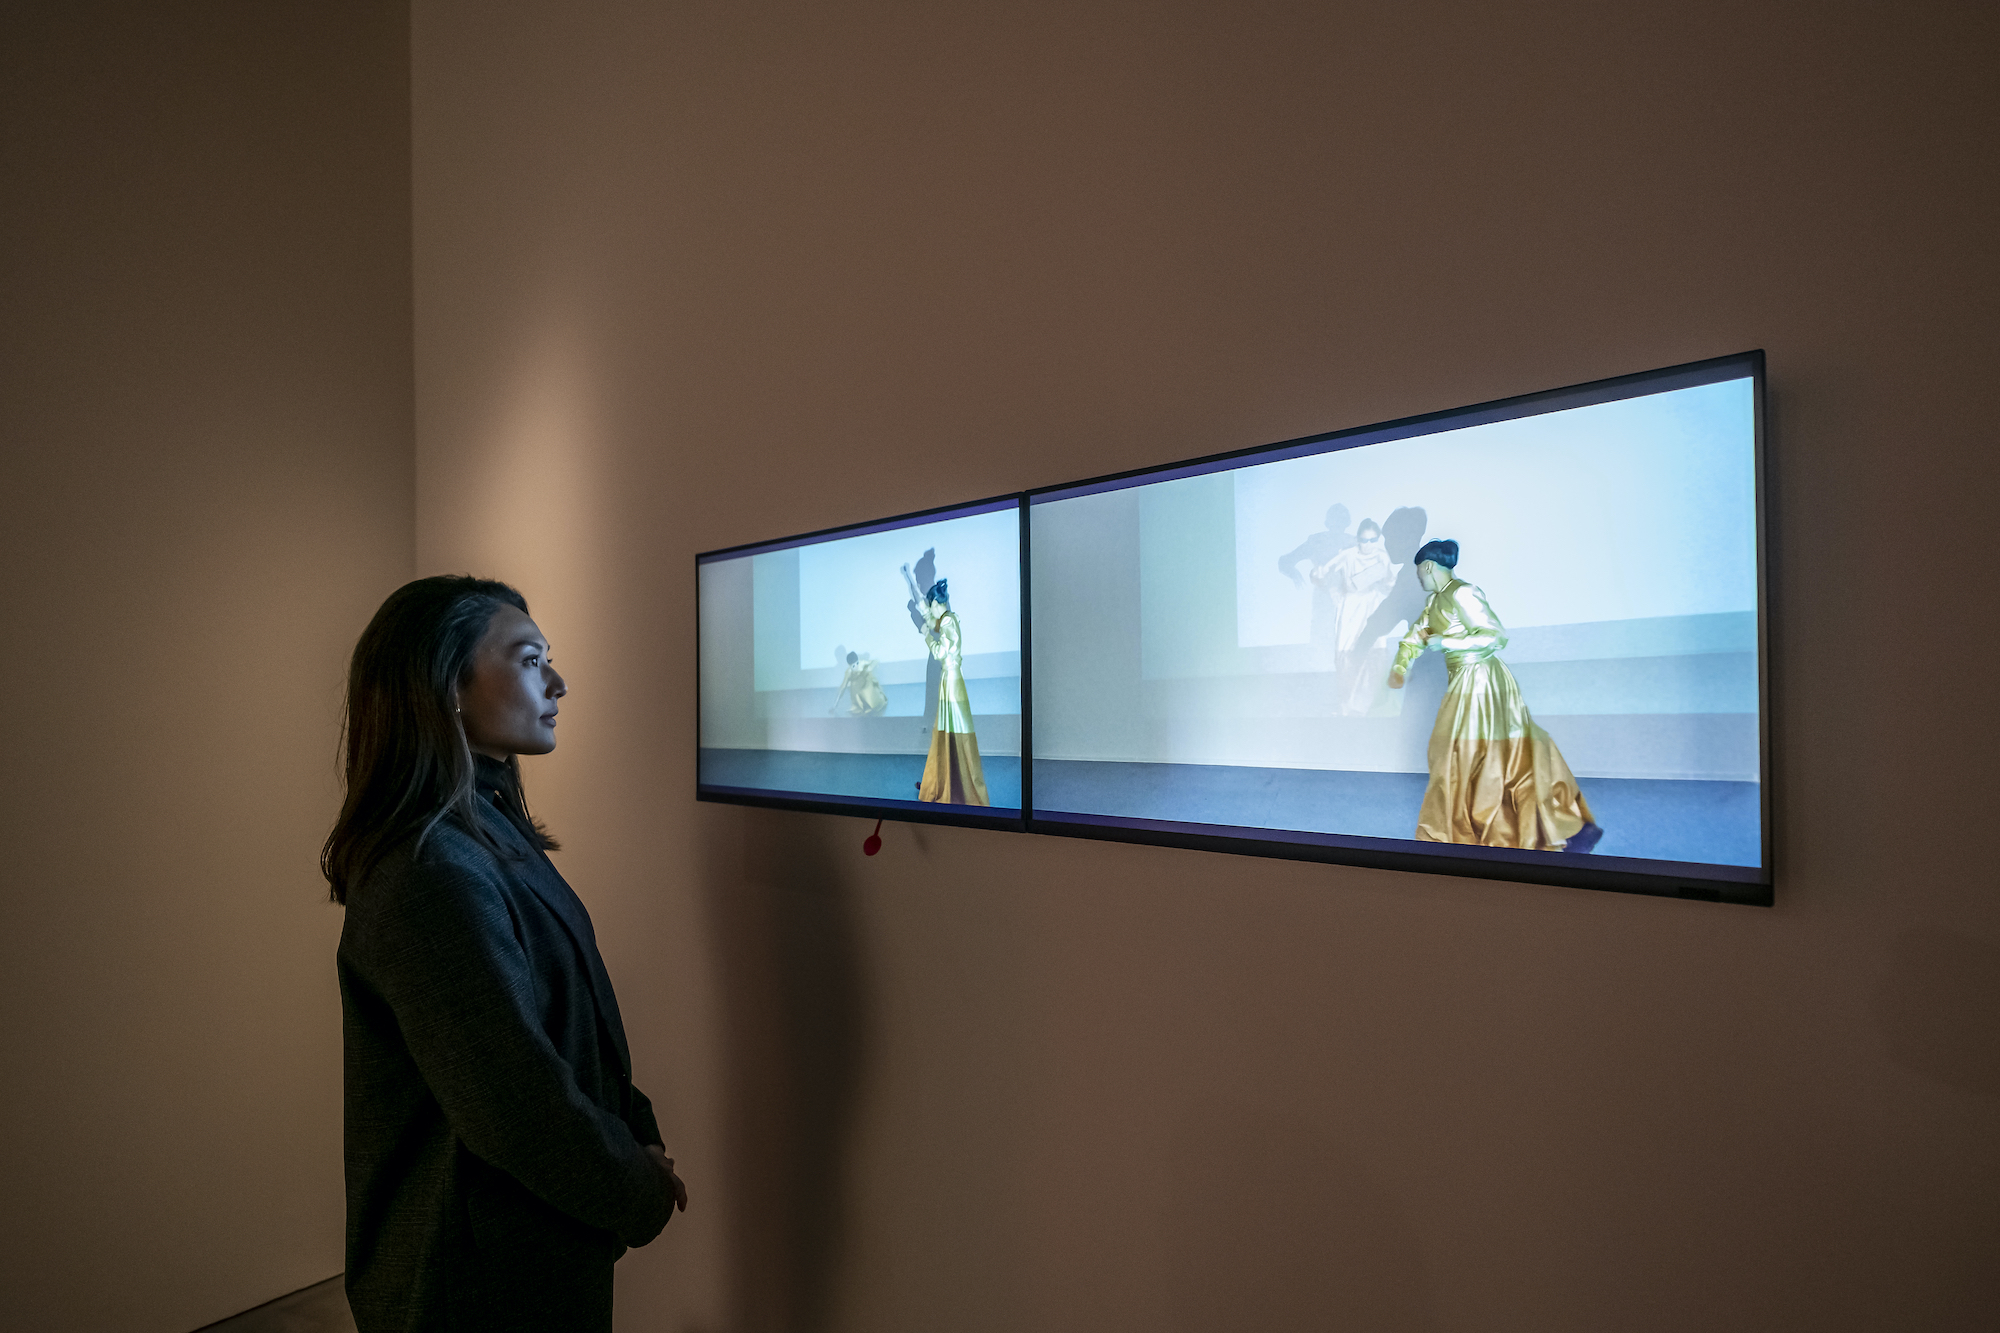 Image of a woman who's face is lit by the two screens she is watching in a dark room. The screen shows a blue background and a figure in a long yellow and orange dress.